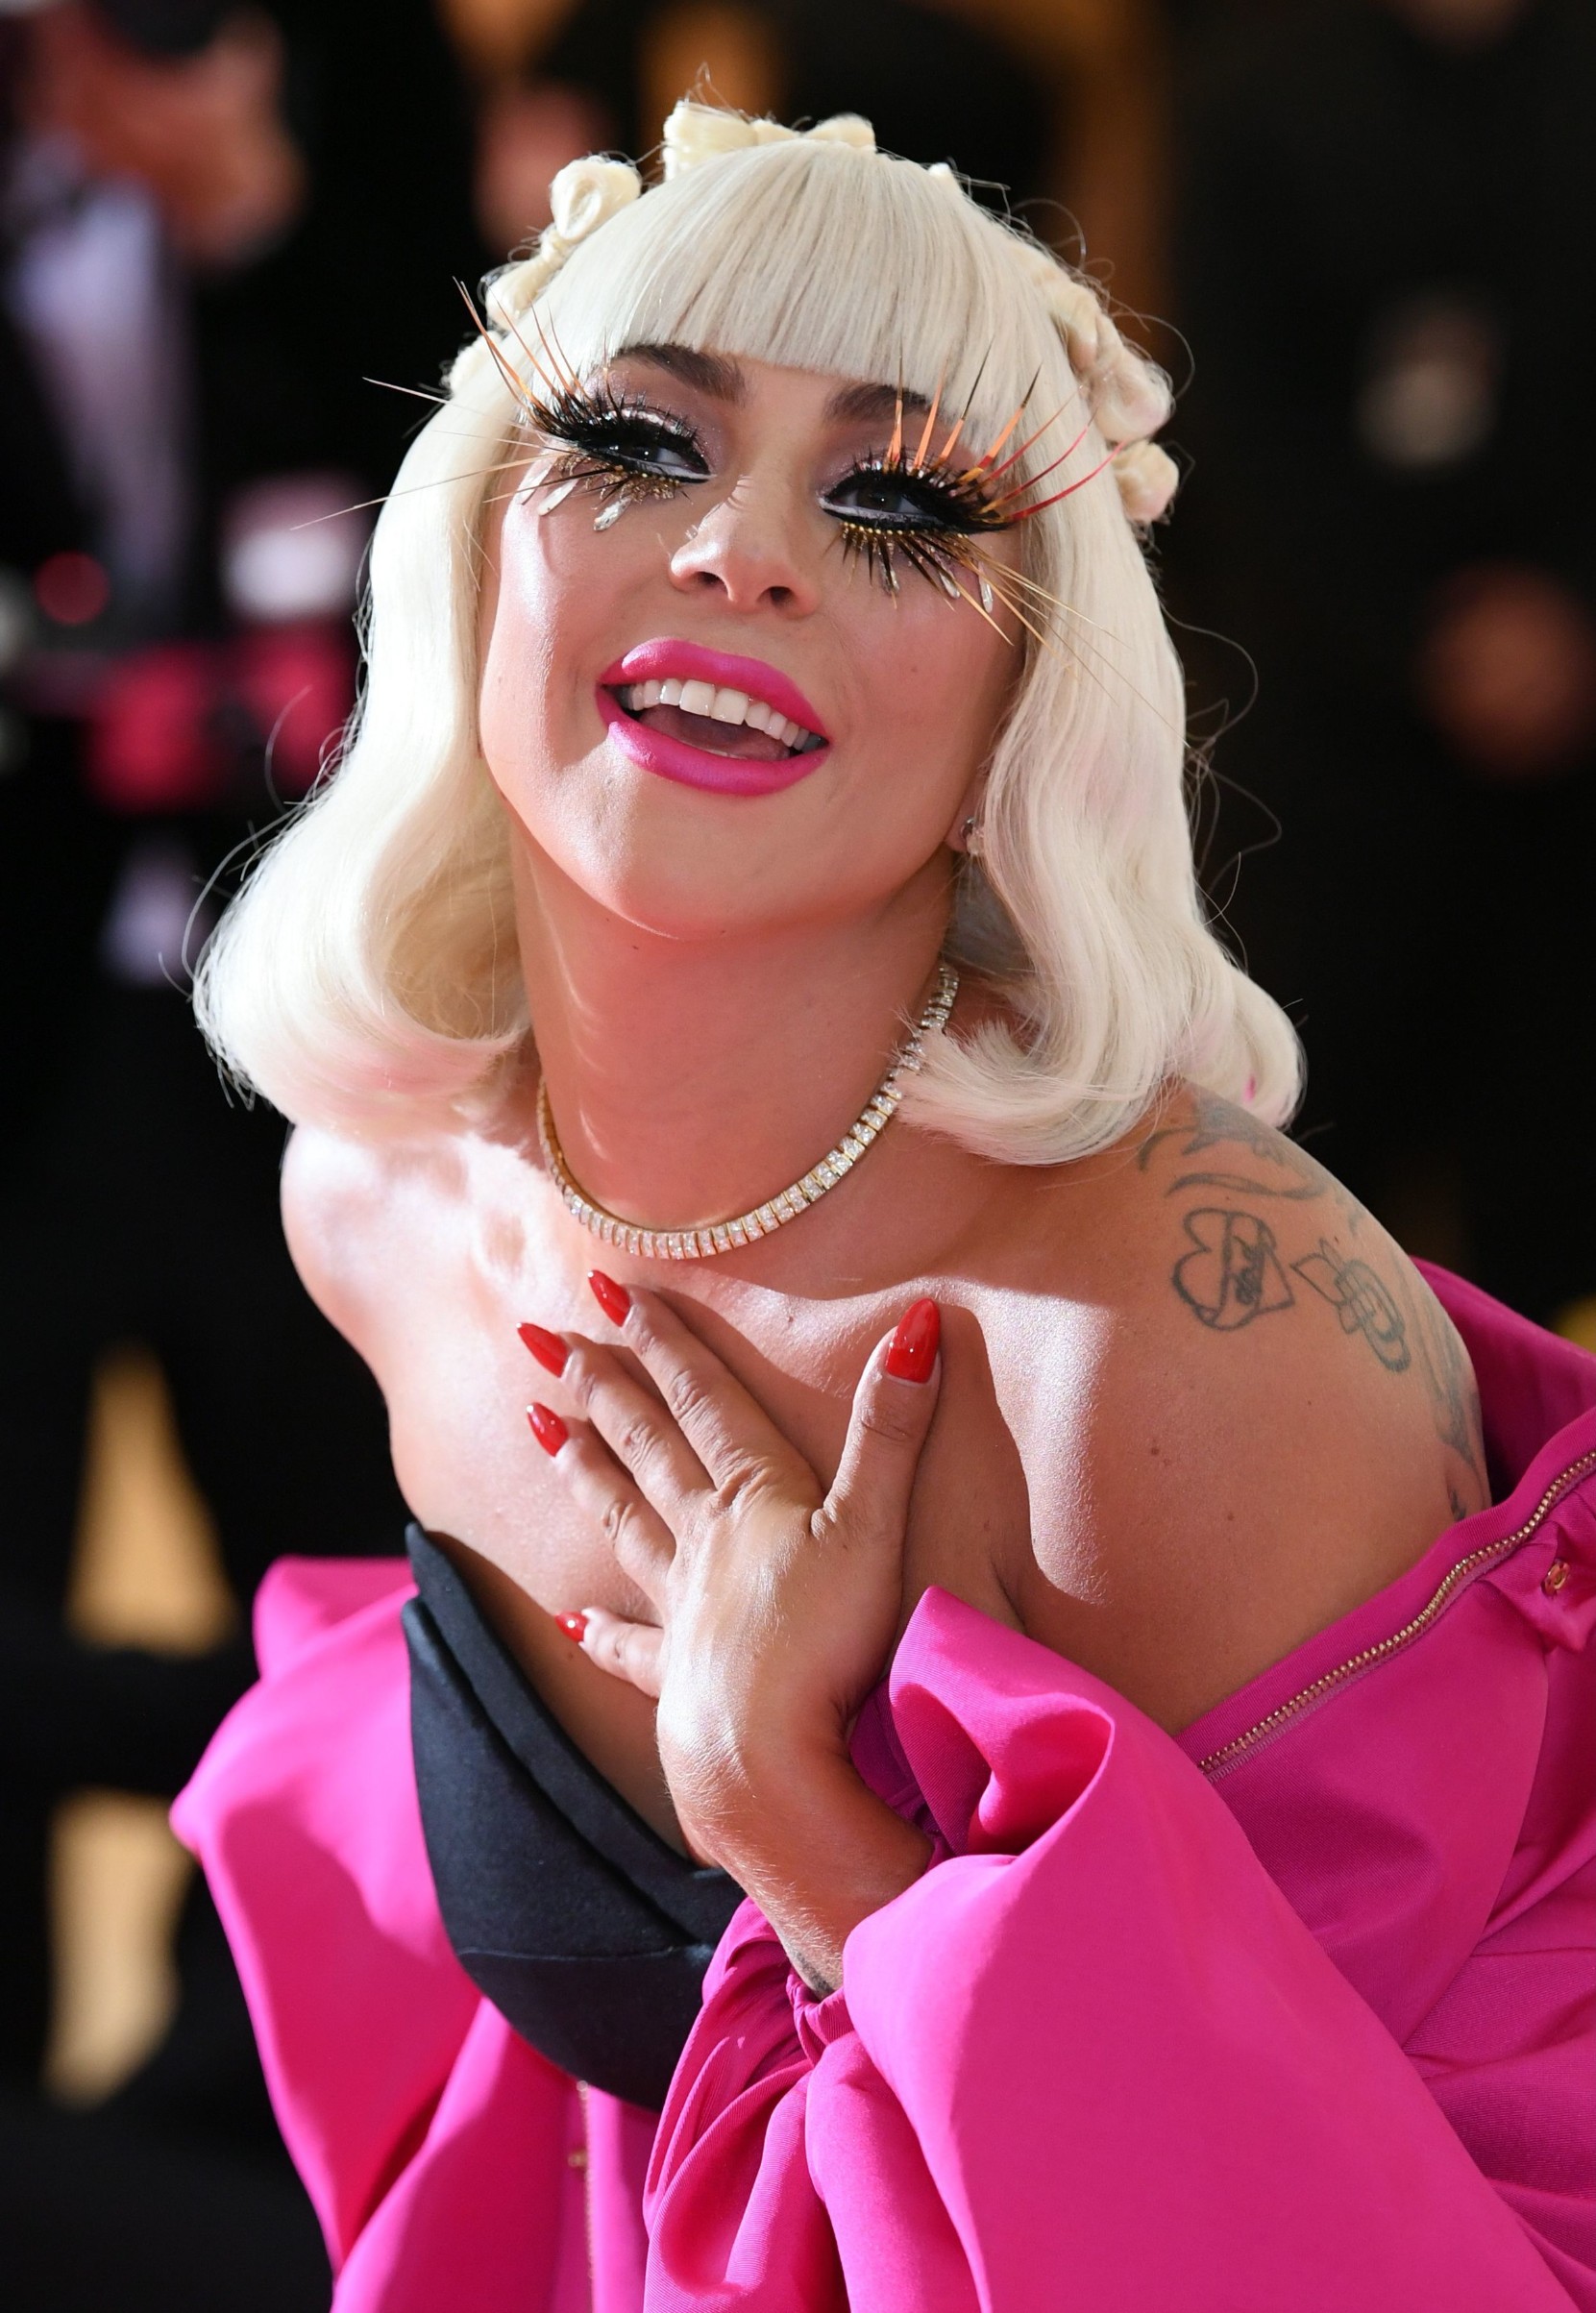 Lady Gaga
Costume Institute Benefit celebrating the opening of Camp: Notes on Fashion, Arrivals, The Metropolitan Museum of Art, New York, USA - 06 May 2019, Image: 431371870, License: Rights-managed, Restrictions: , Model Release: no, Credit line: David Fisher / Shutterstock Editorial / Profimedia